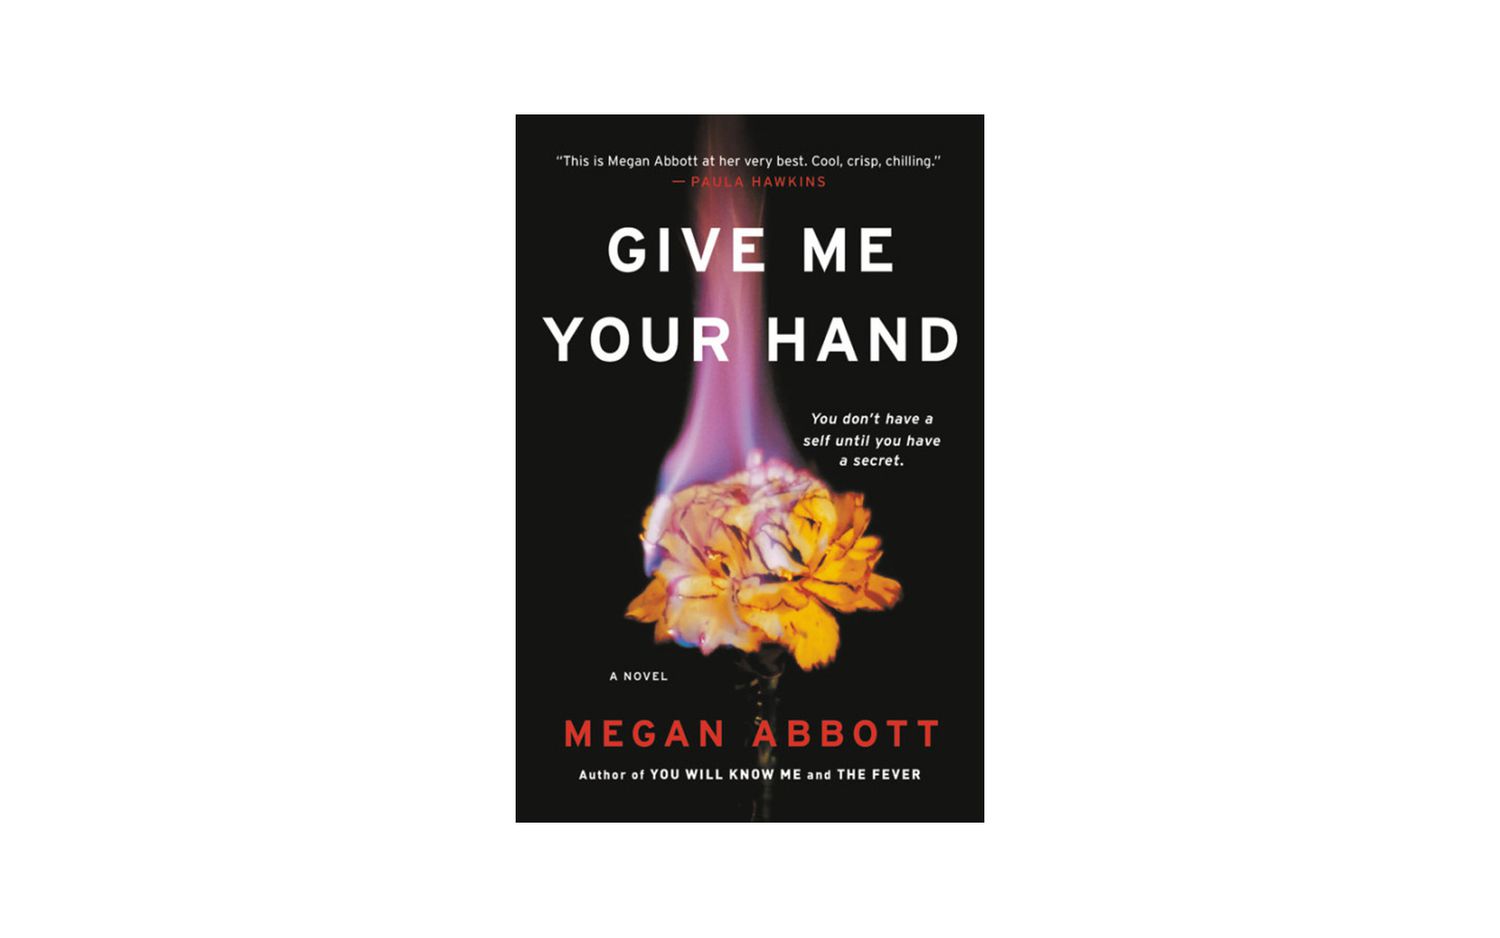 Barnes and Noble Book Sale Give Me Your Hand, by Megan Abbott